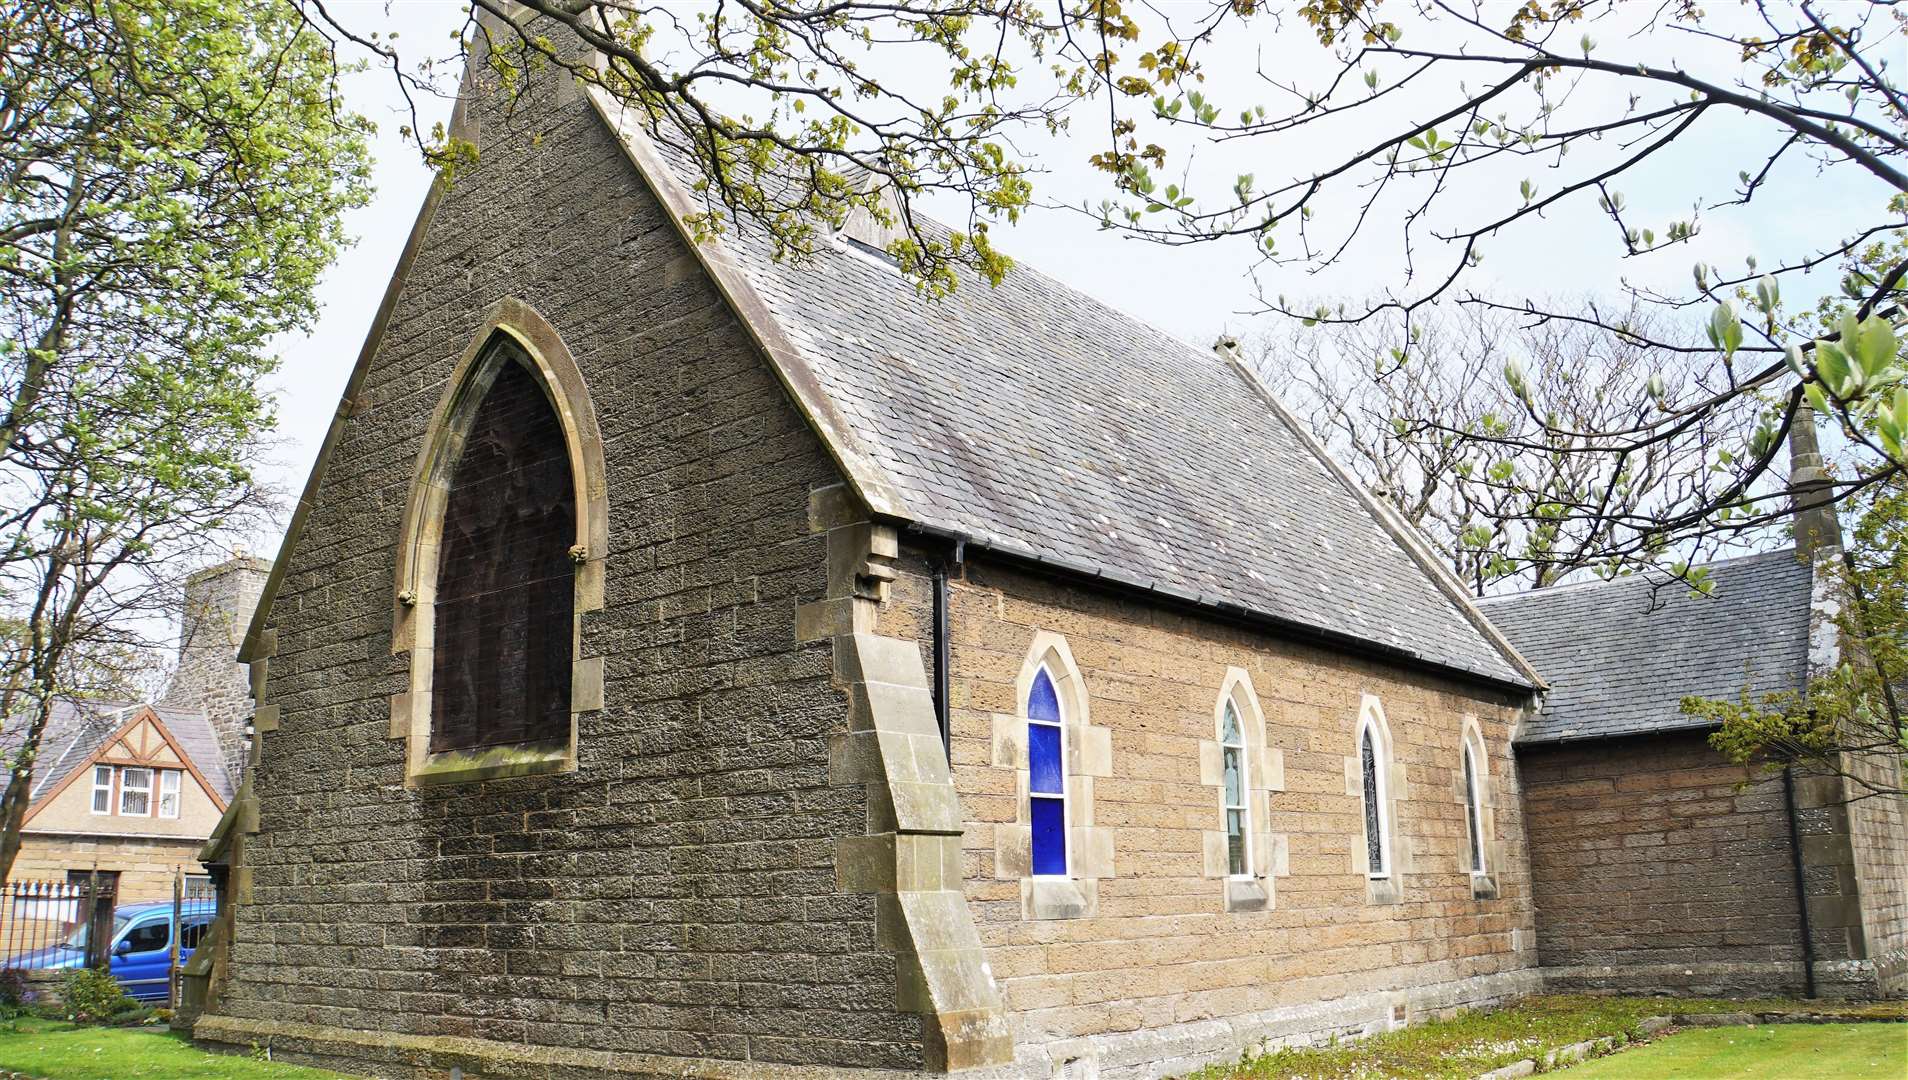 St John's church in Wick recently had renovations carried out which included a fully accessible toilet. Picture: DGS